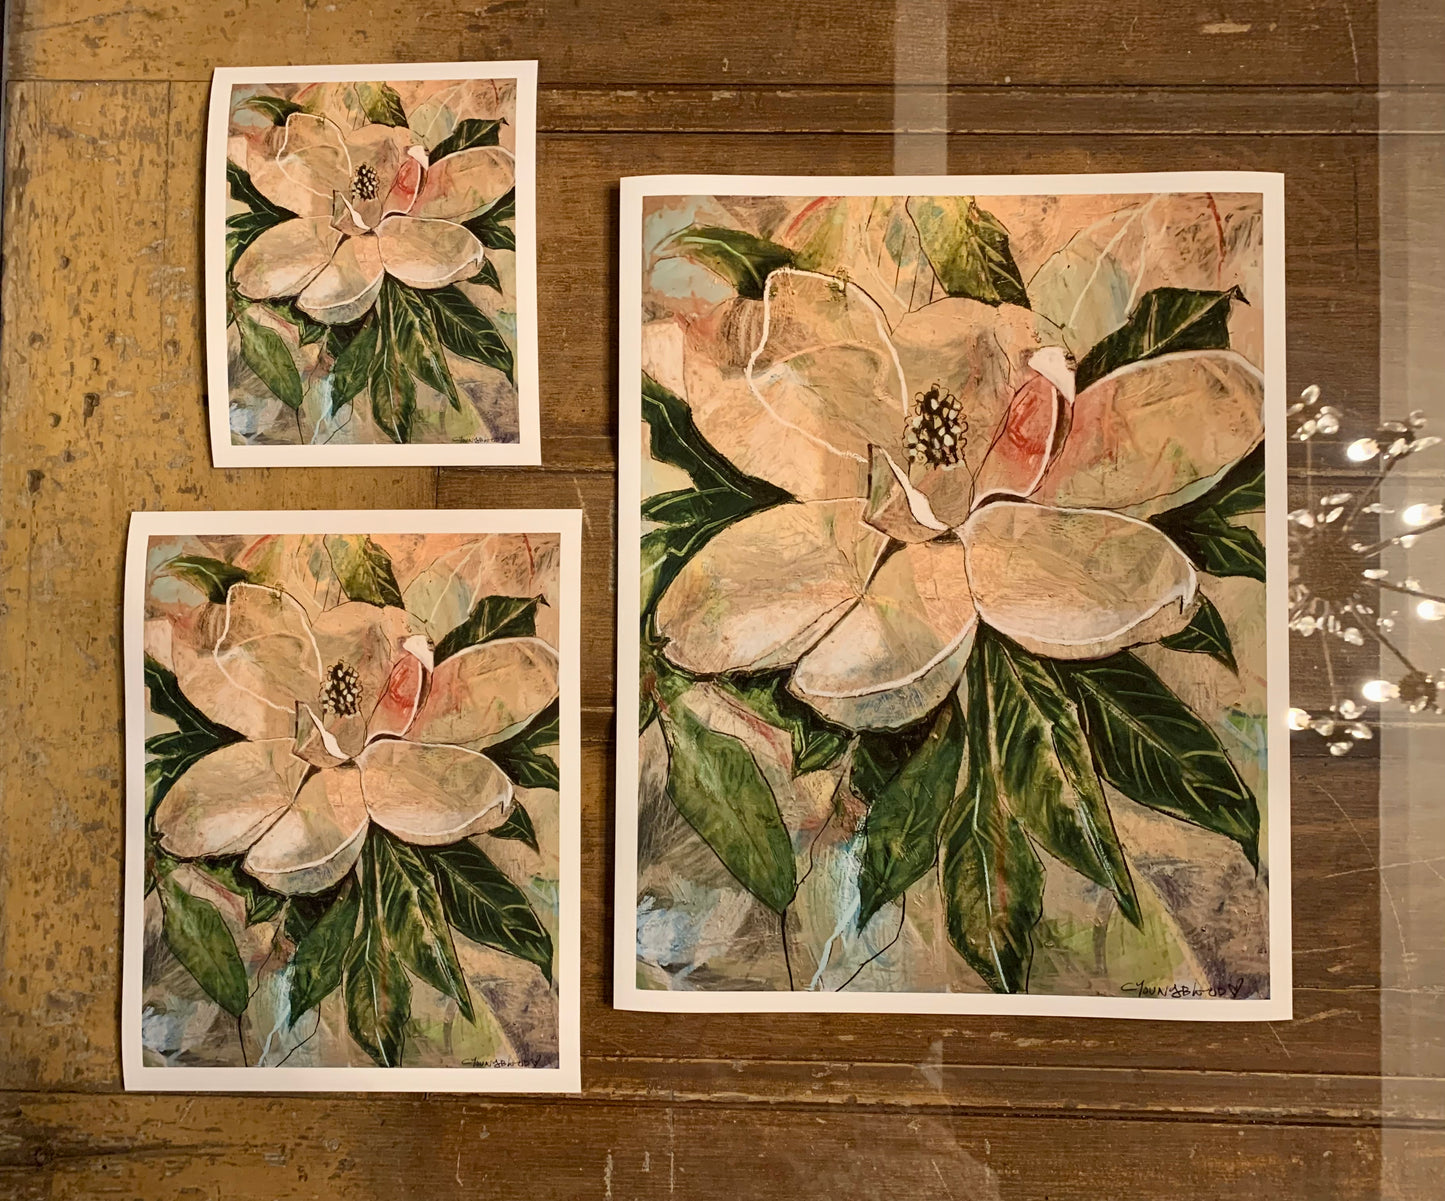 The Golden Magnolia Reproduction on 100% cotton Paper